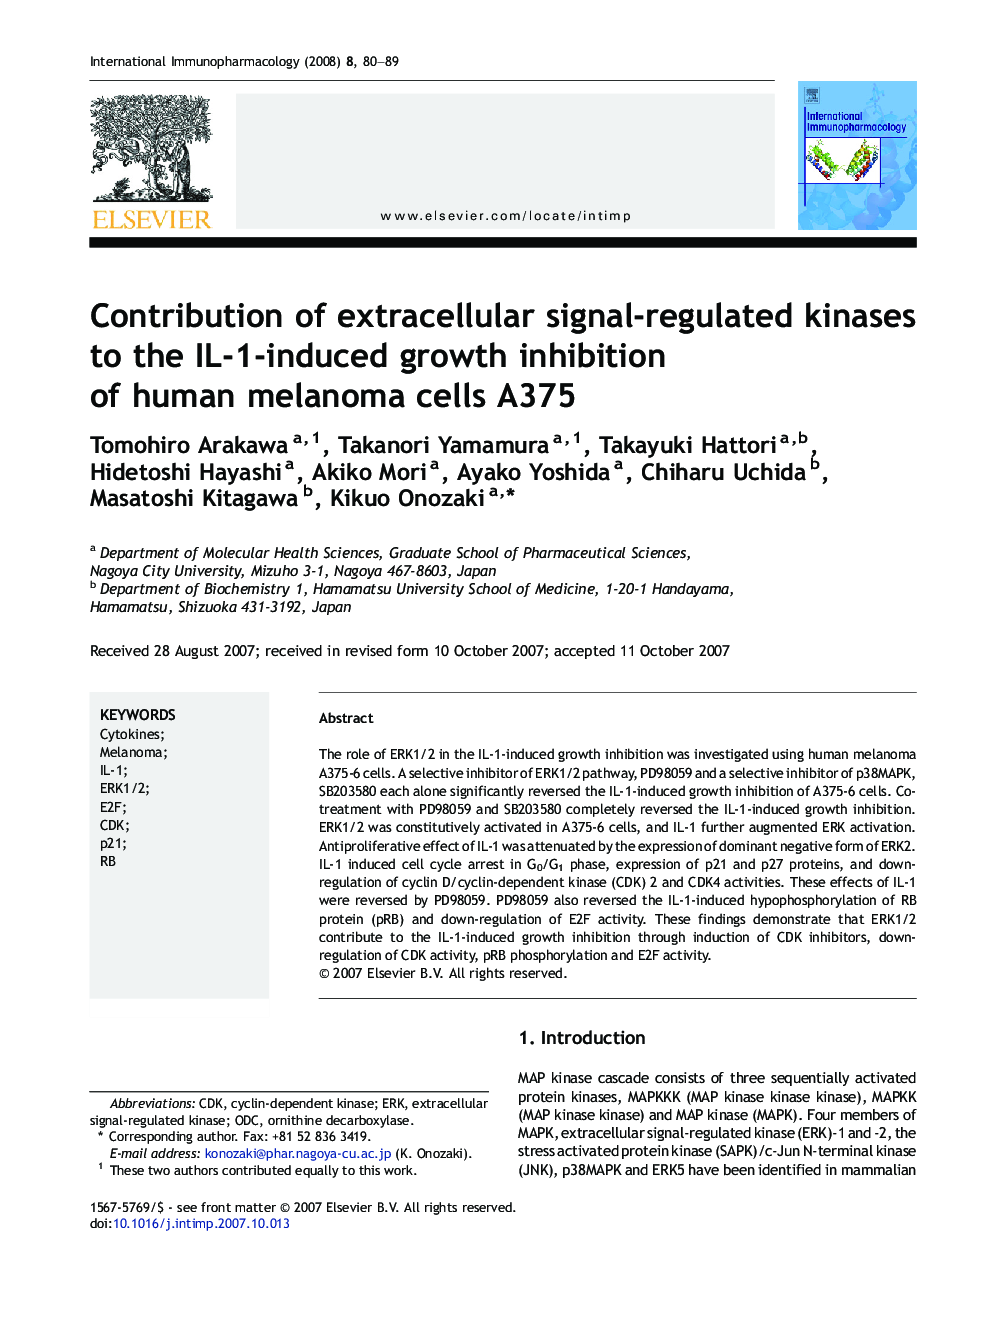 Contribution of extracellular signal-regulated kinases to the IL-1-induced growth inhibition of human melanoma cells A375